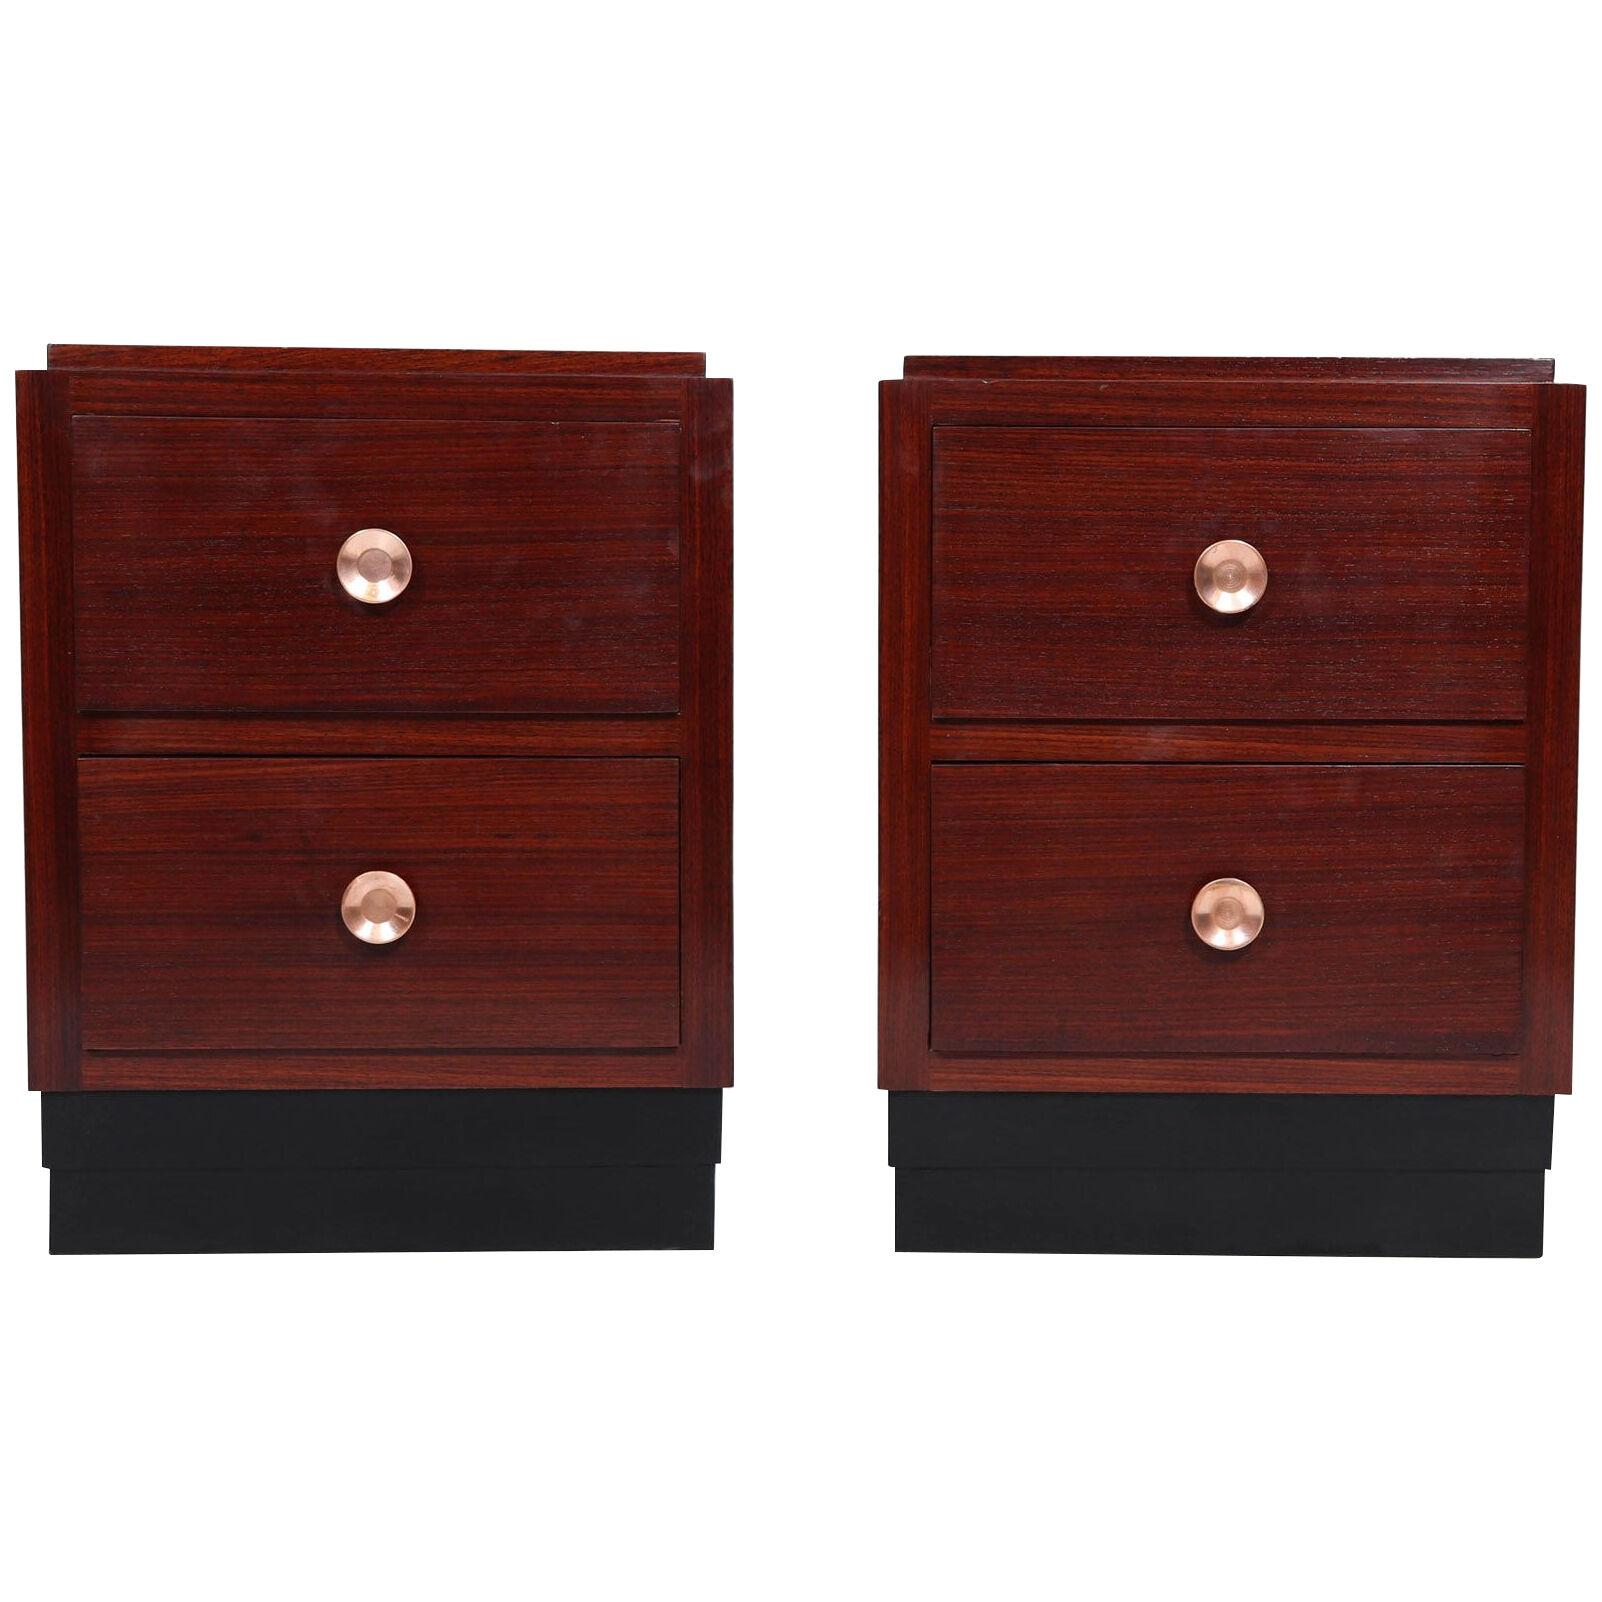 PAIR OF FRENCH ART DECO BEDSIDE CHESTS